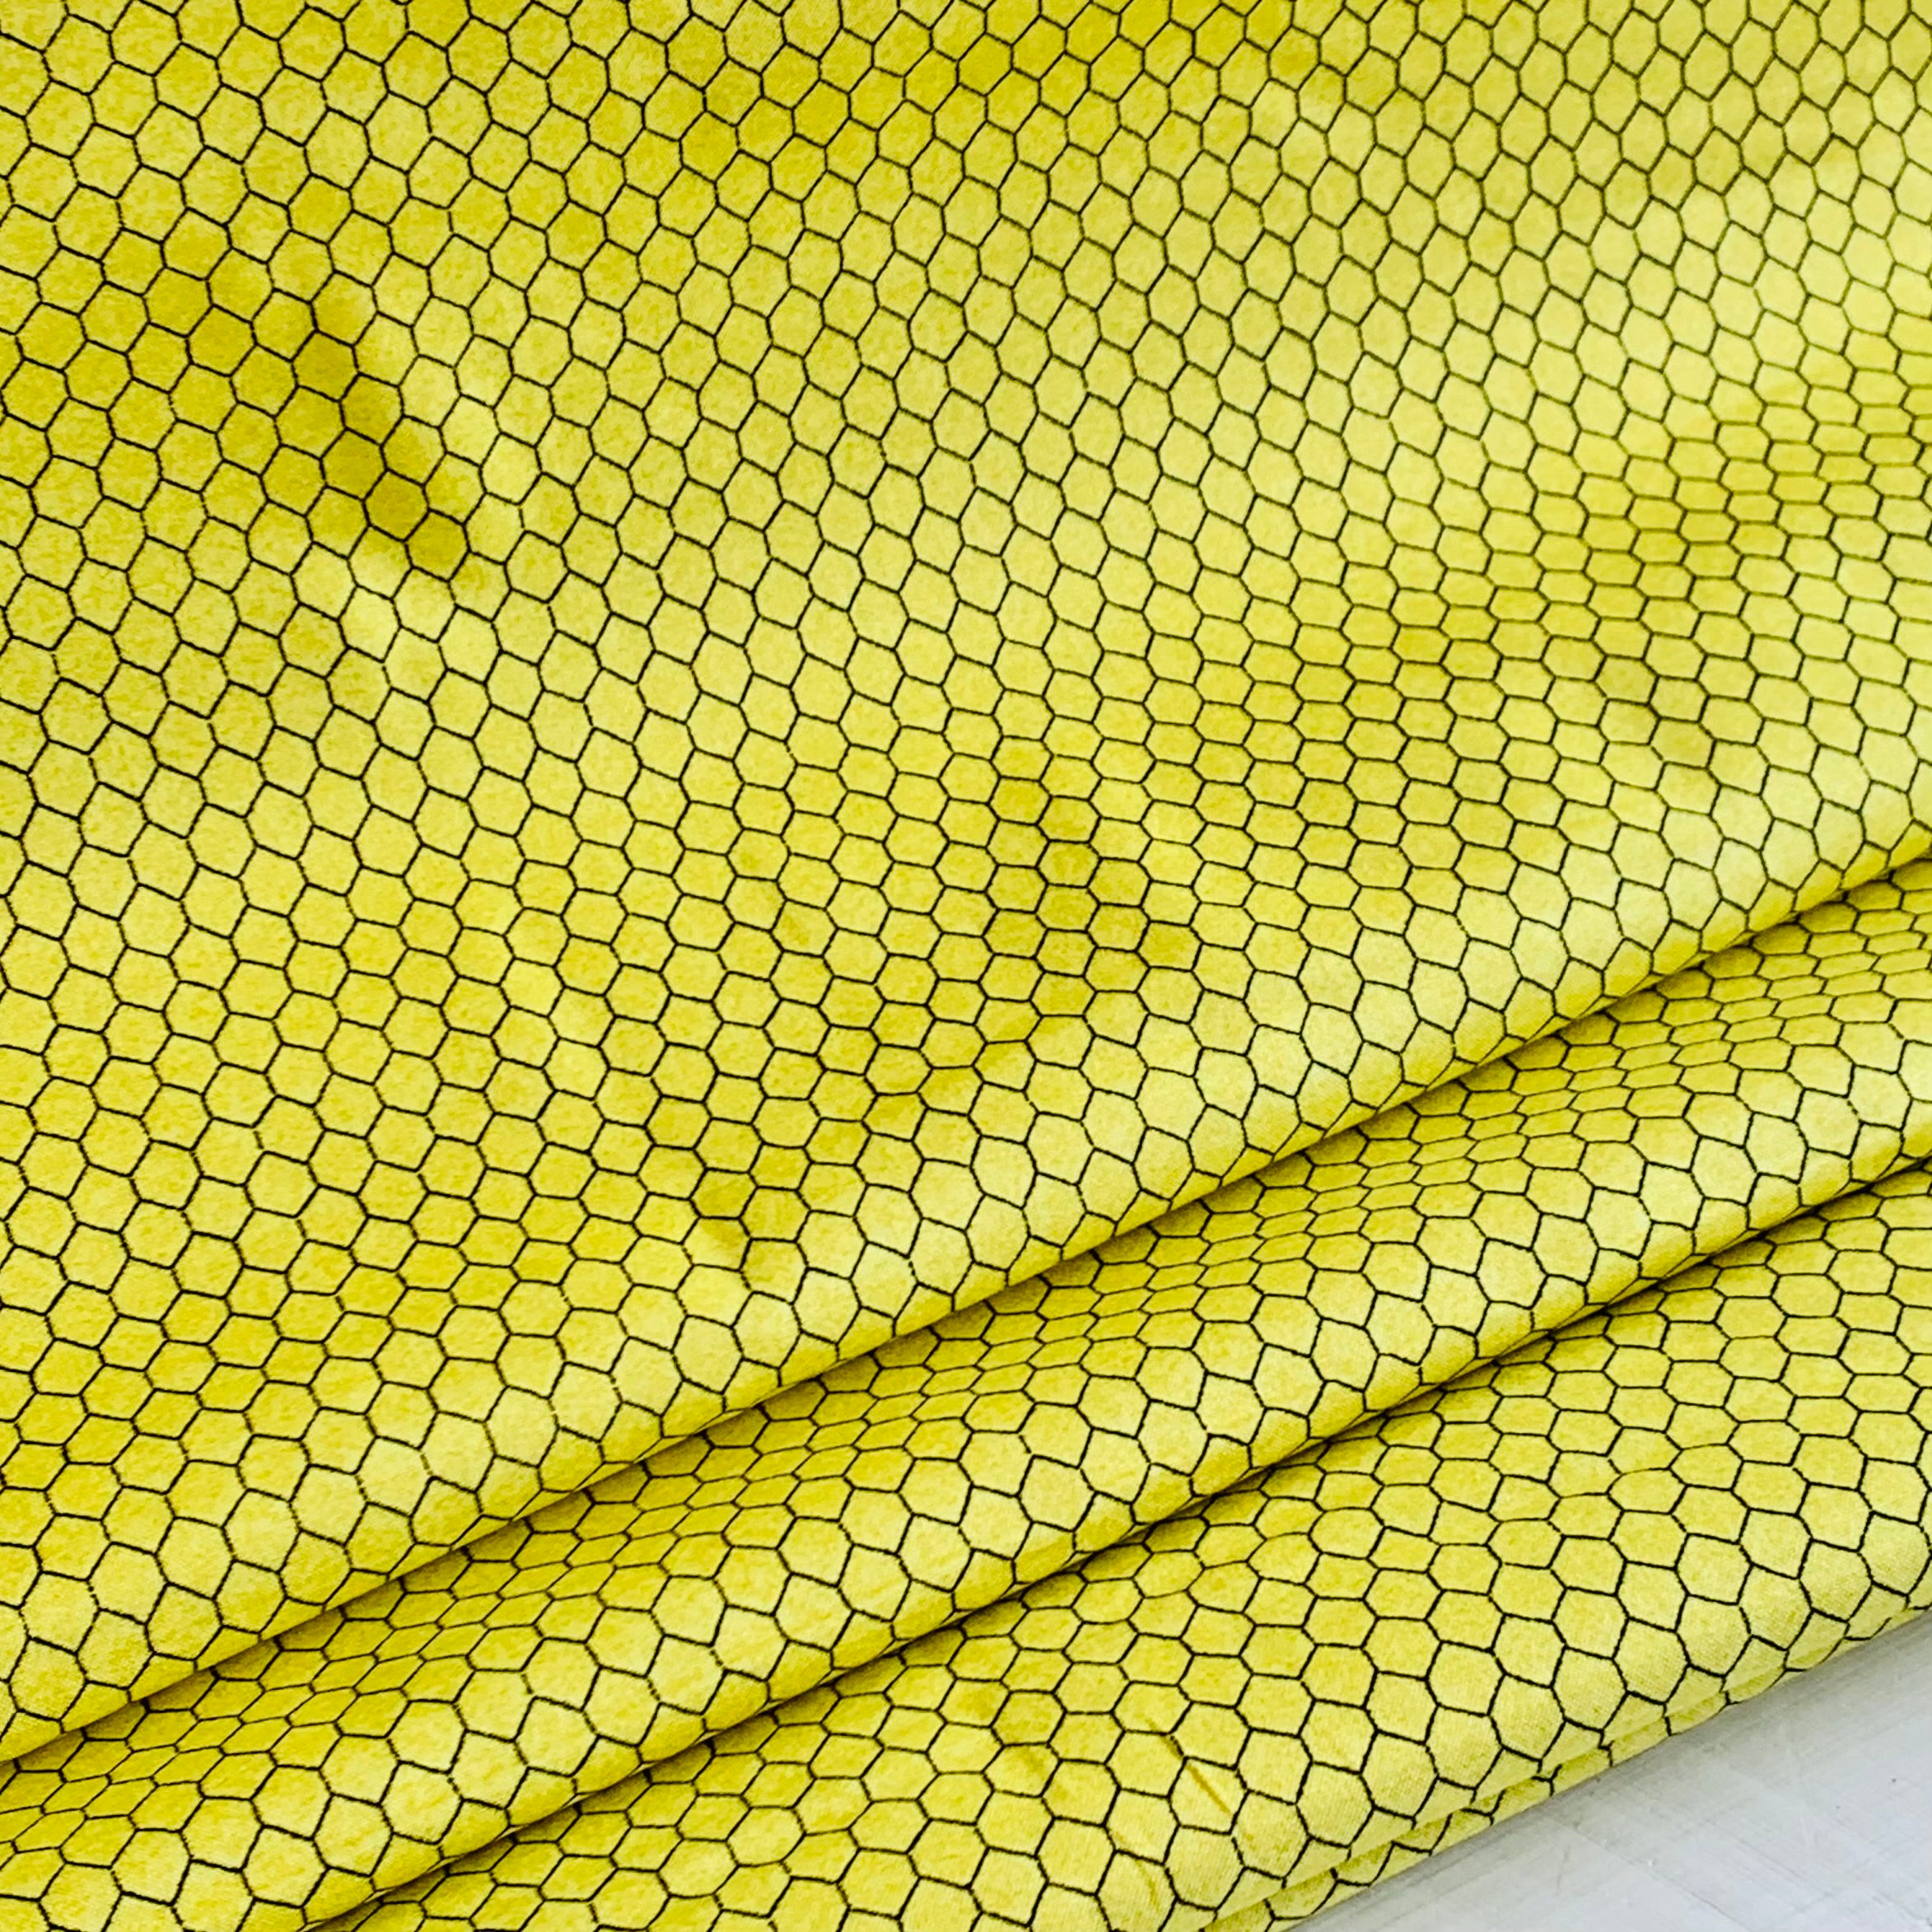 Chicken Wire From Farmers Market Collection by Whistler Studios and Milled by Windham Fabrics, Pattern 52769-4 Yellow Cotton Fabric